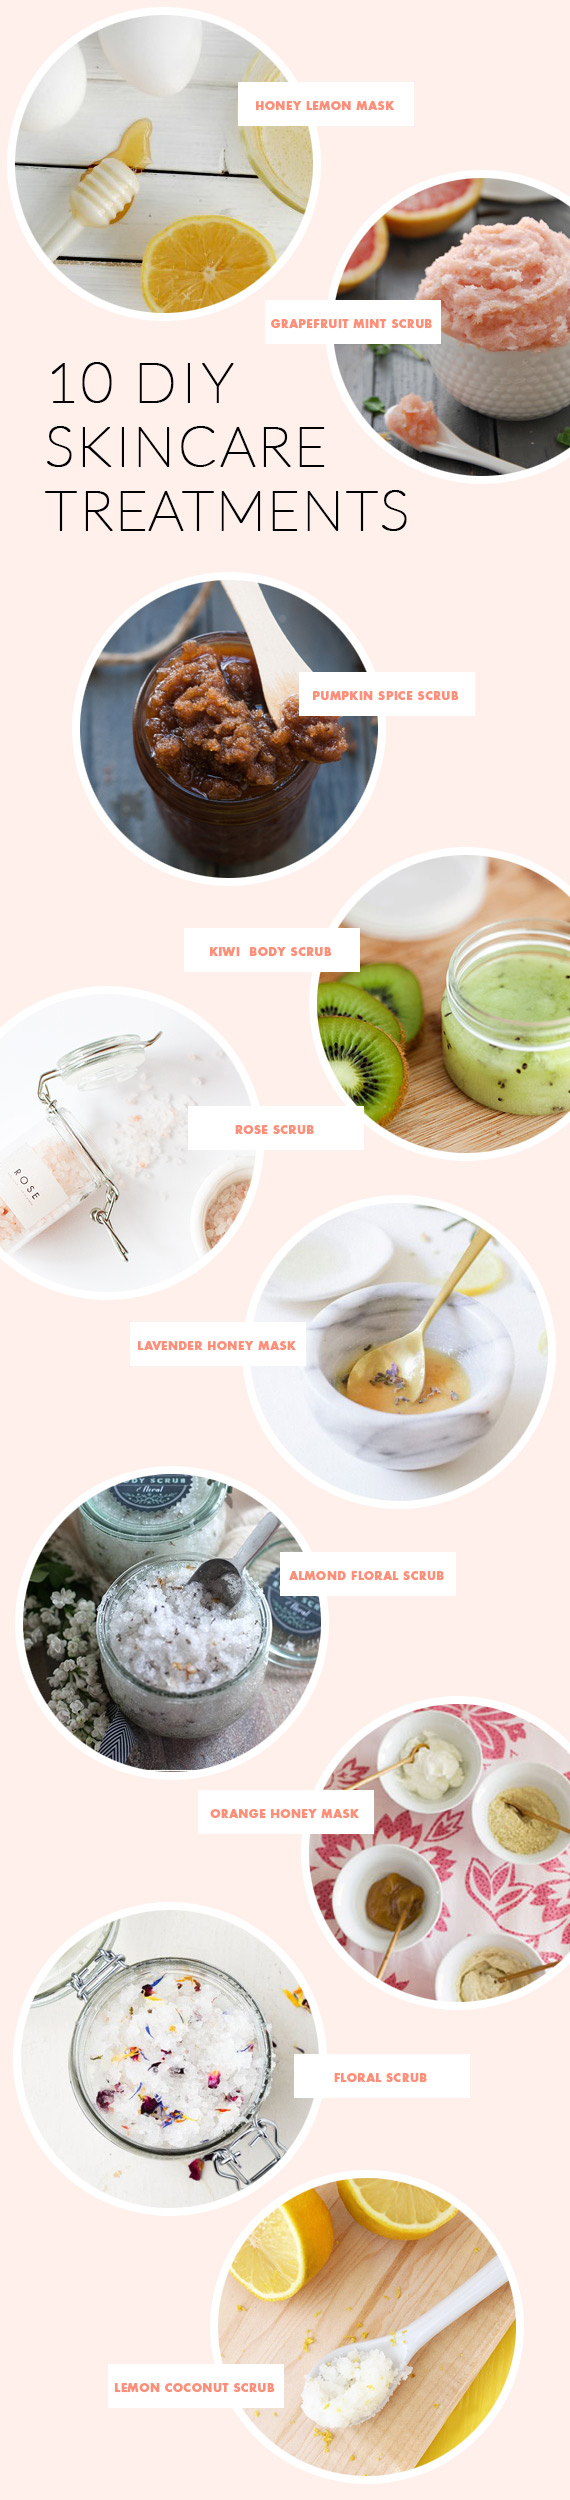 10 diy skincare treatments for your wedding